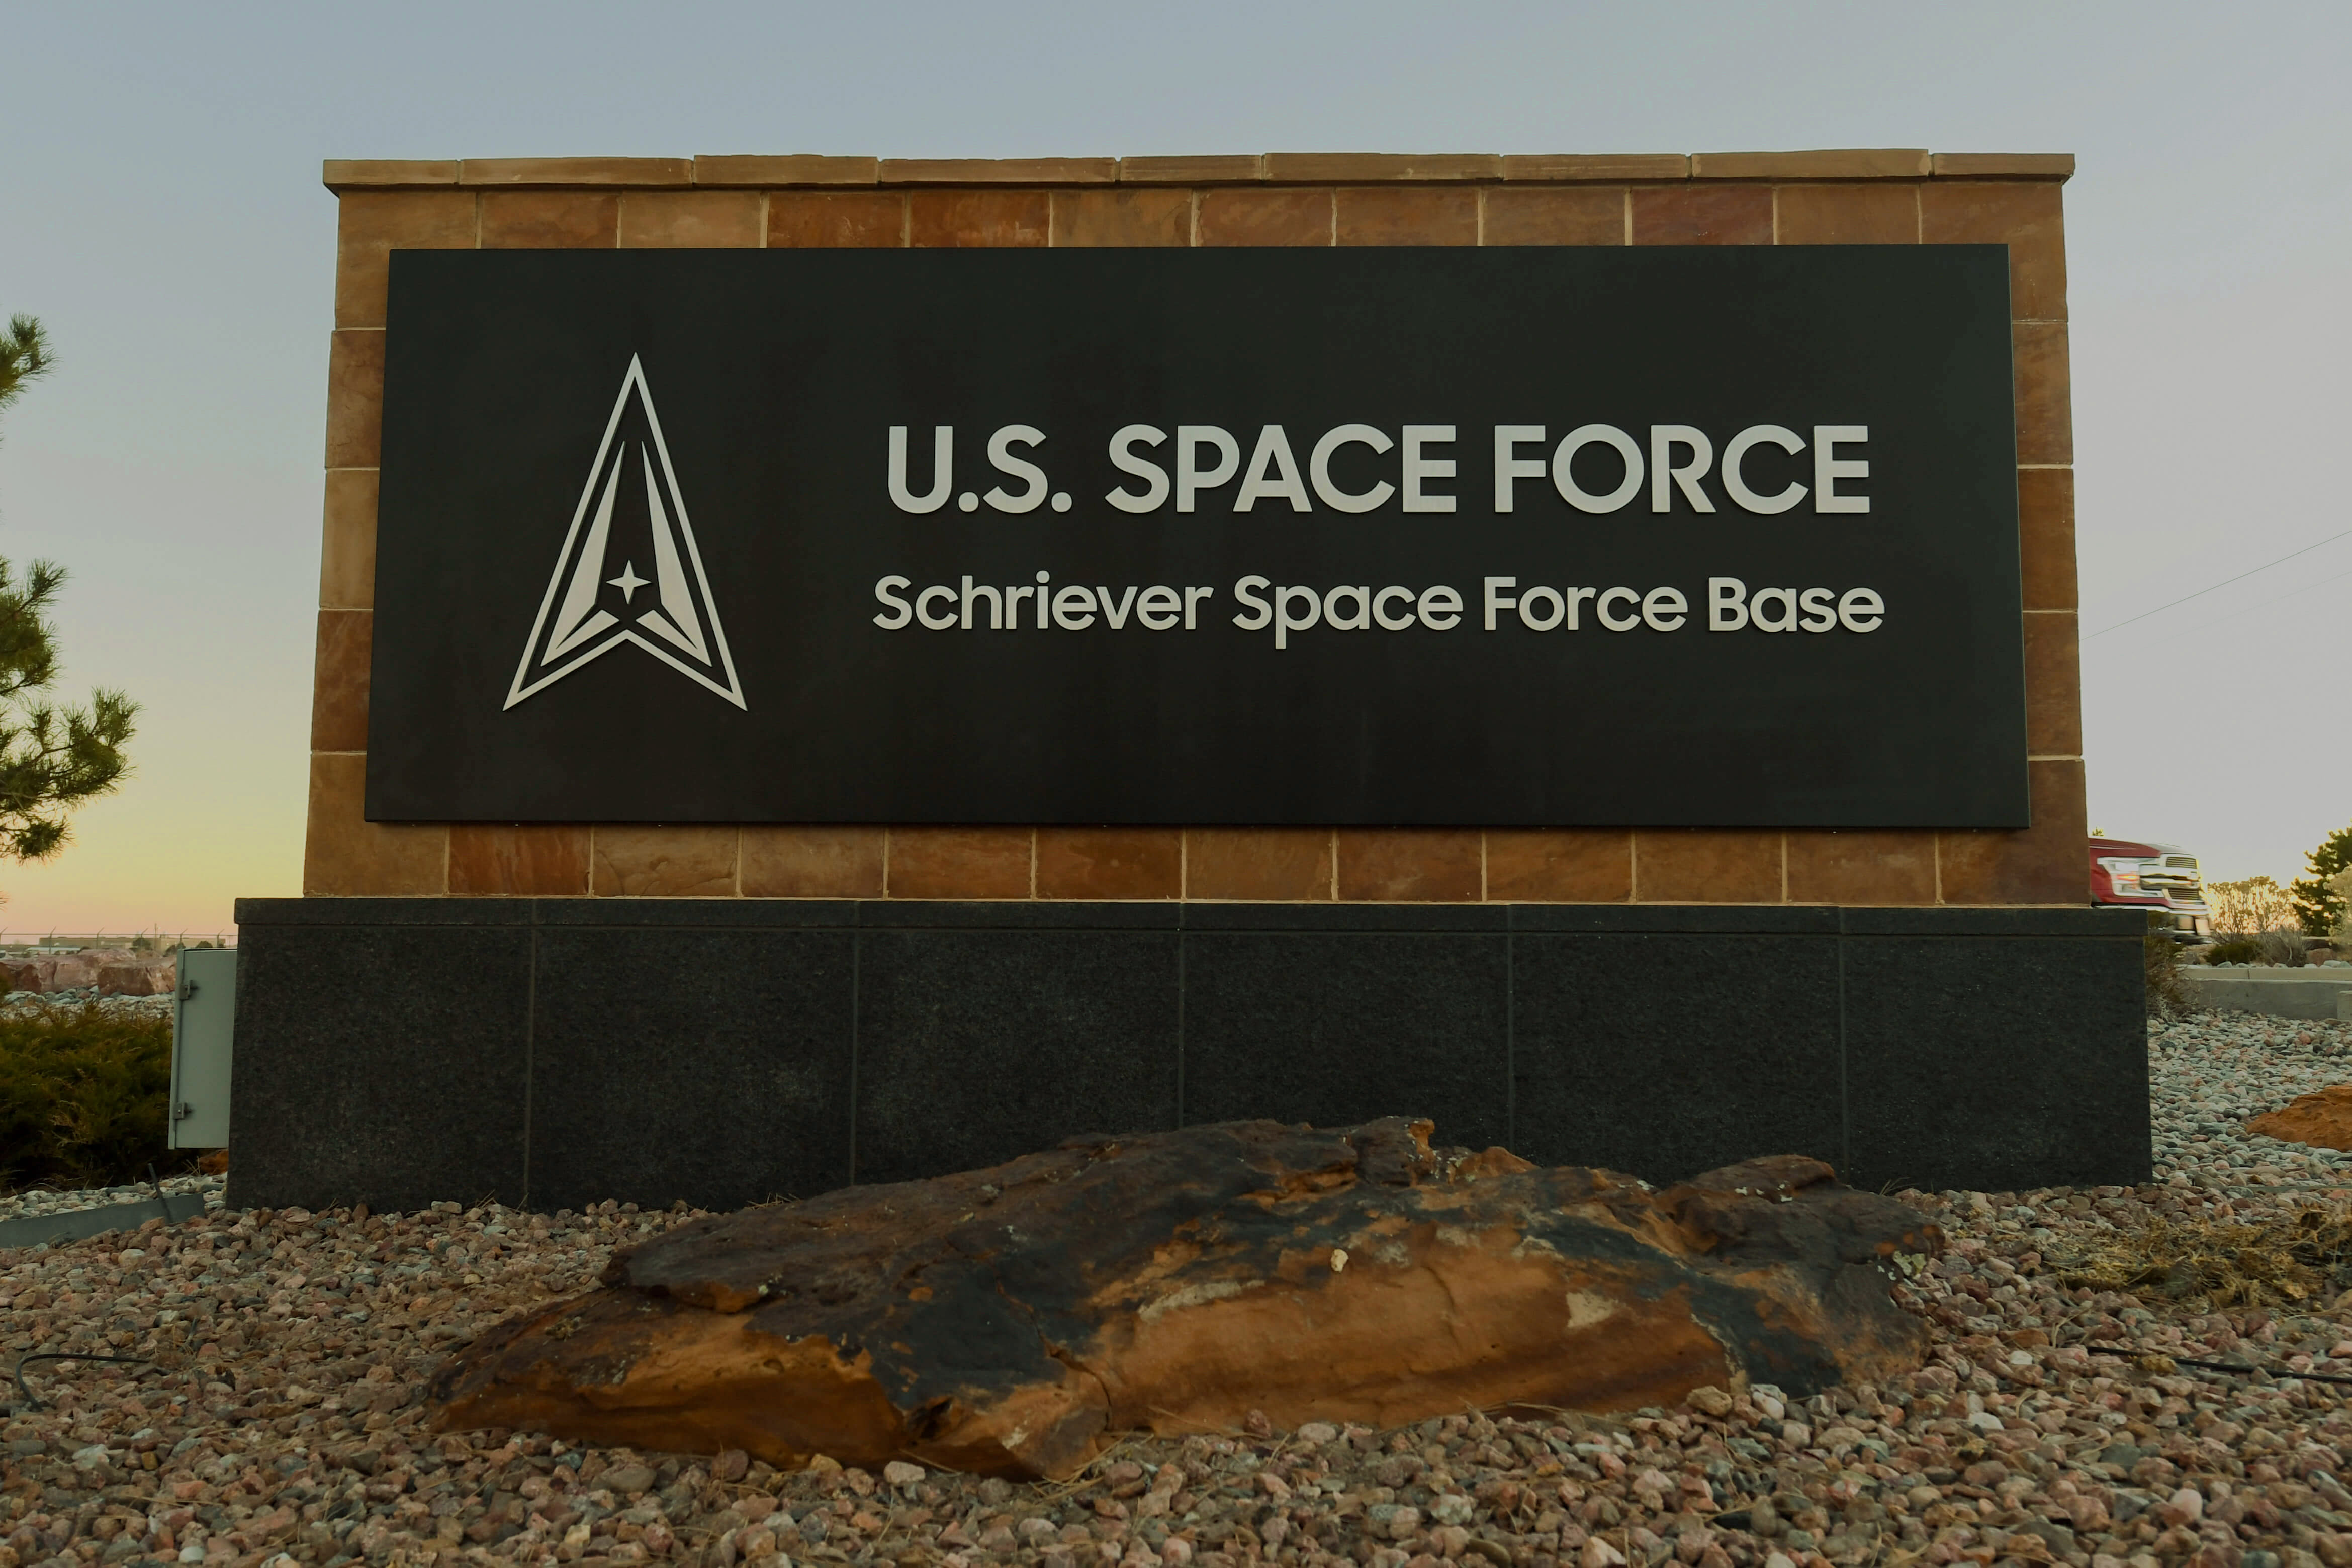 Schriever Space Force Base